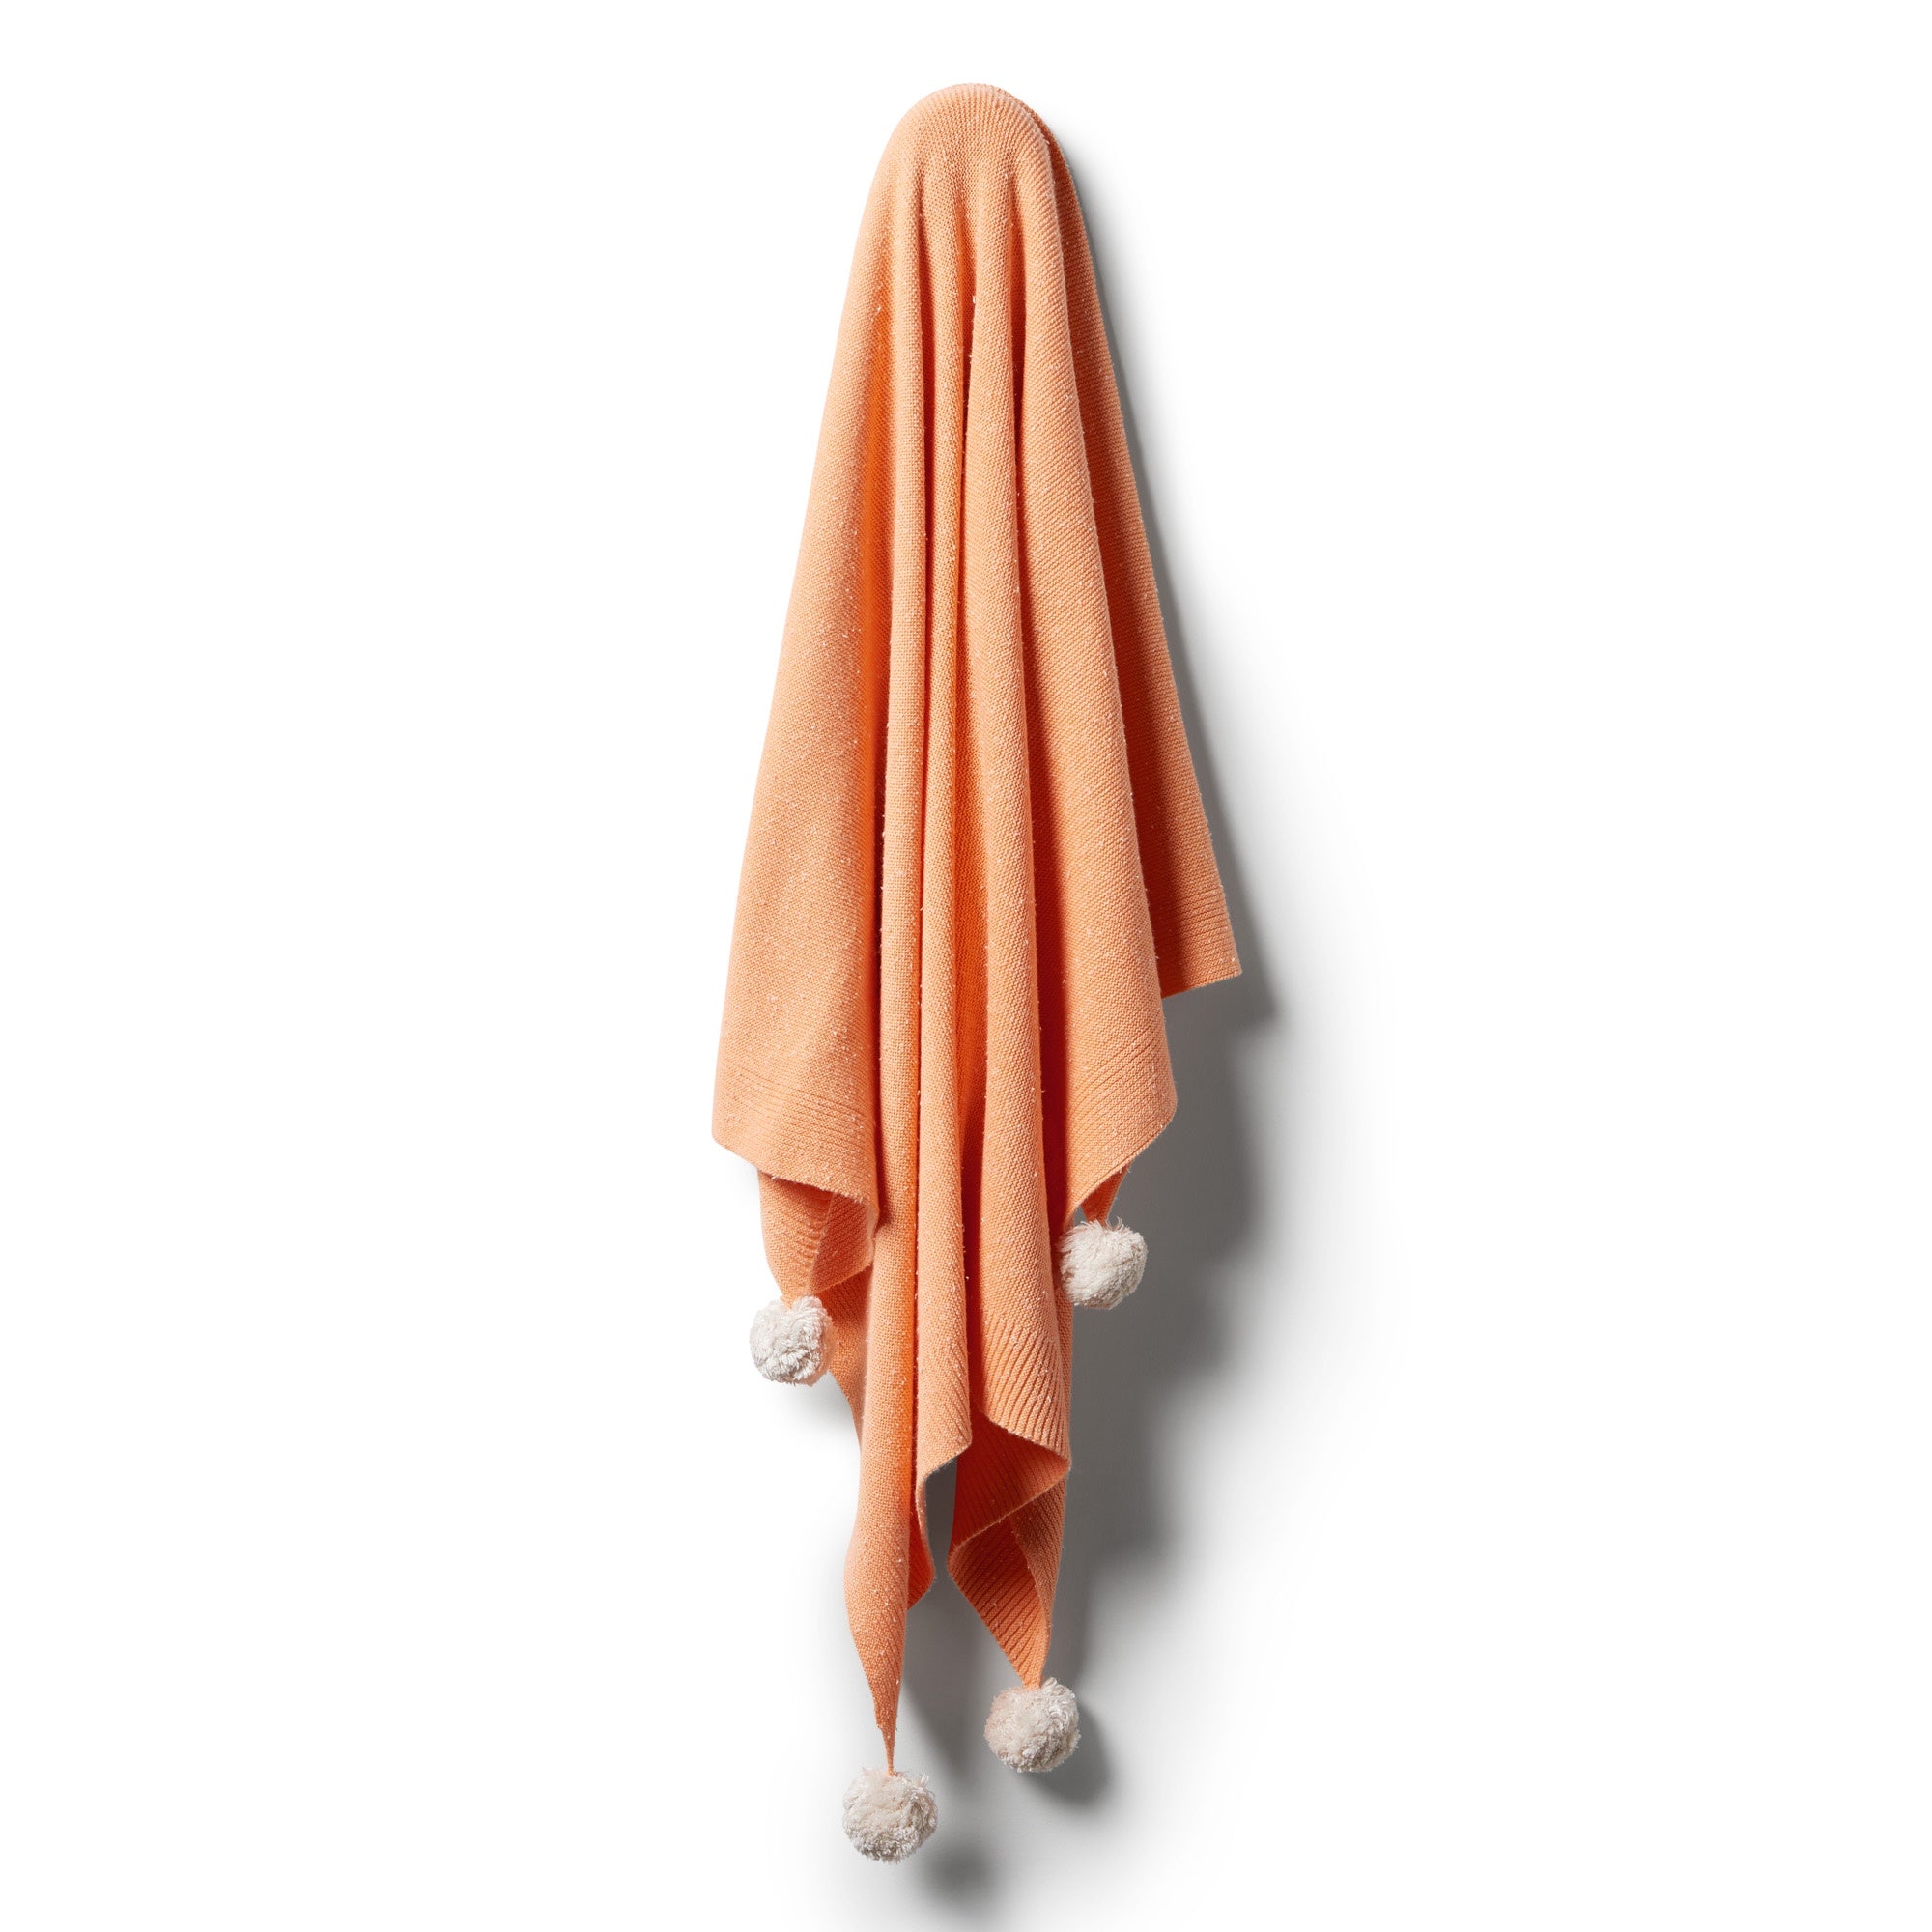 Wilson & Frenchy Knitted Blanket - Apricot Fleck